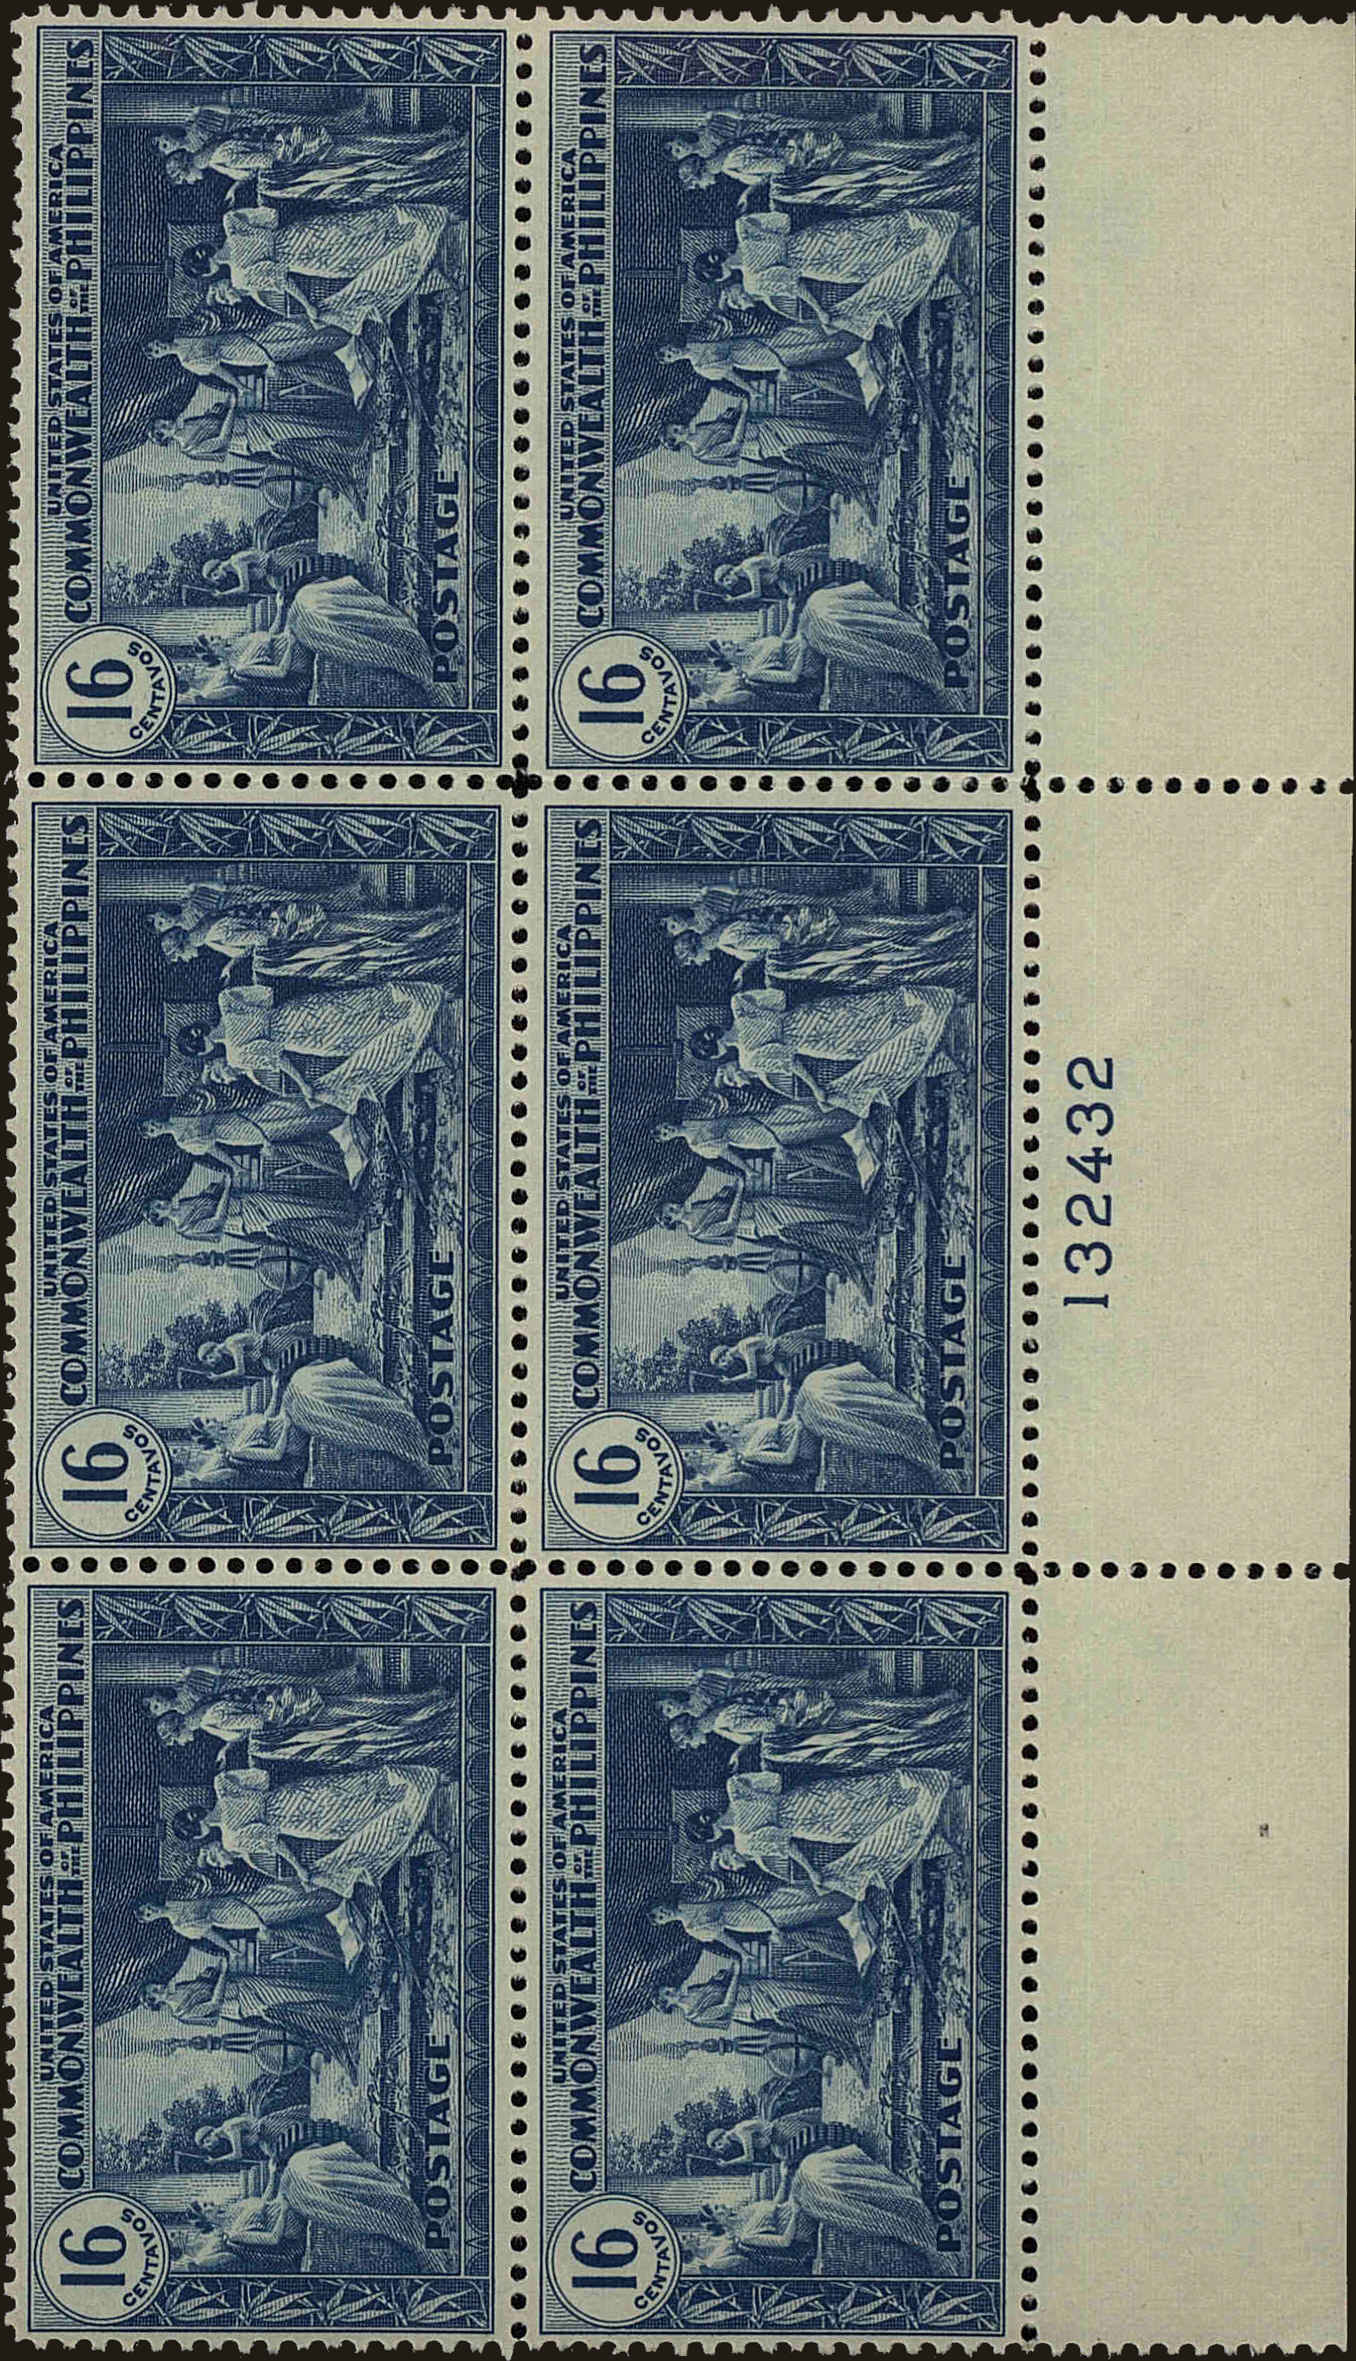 Front view of Philippines (US) 399 collectors stamp